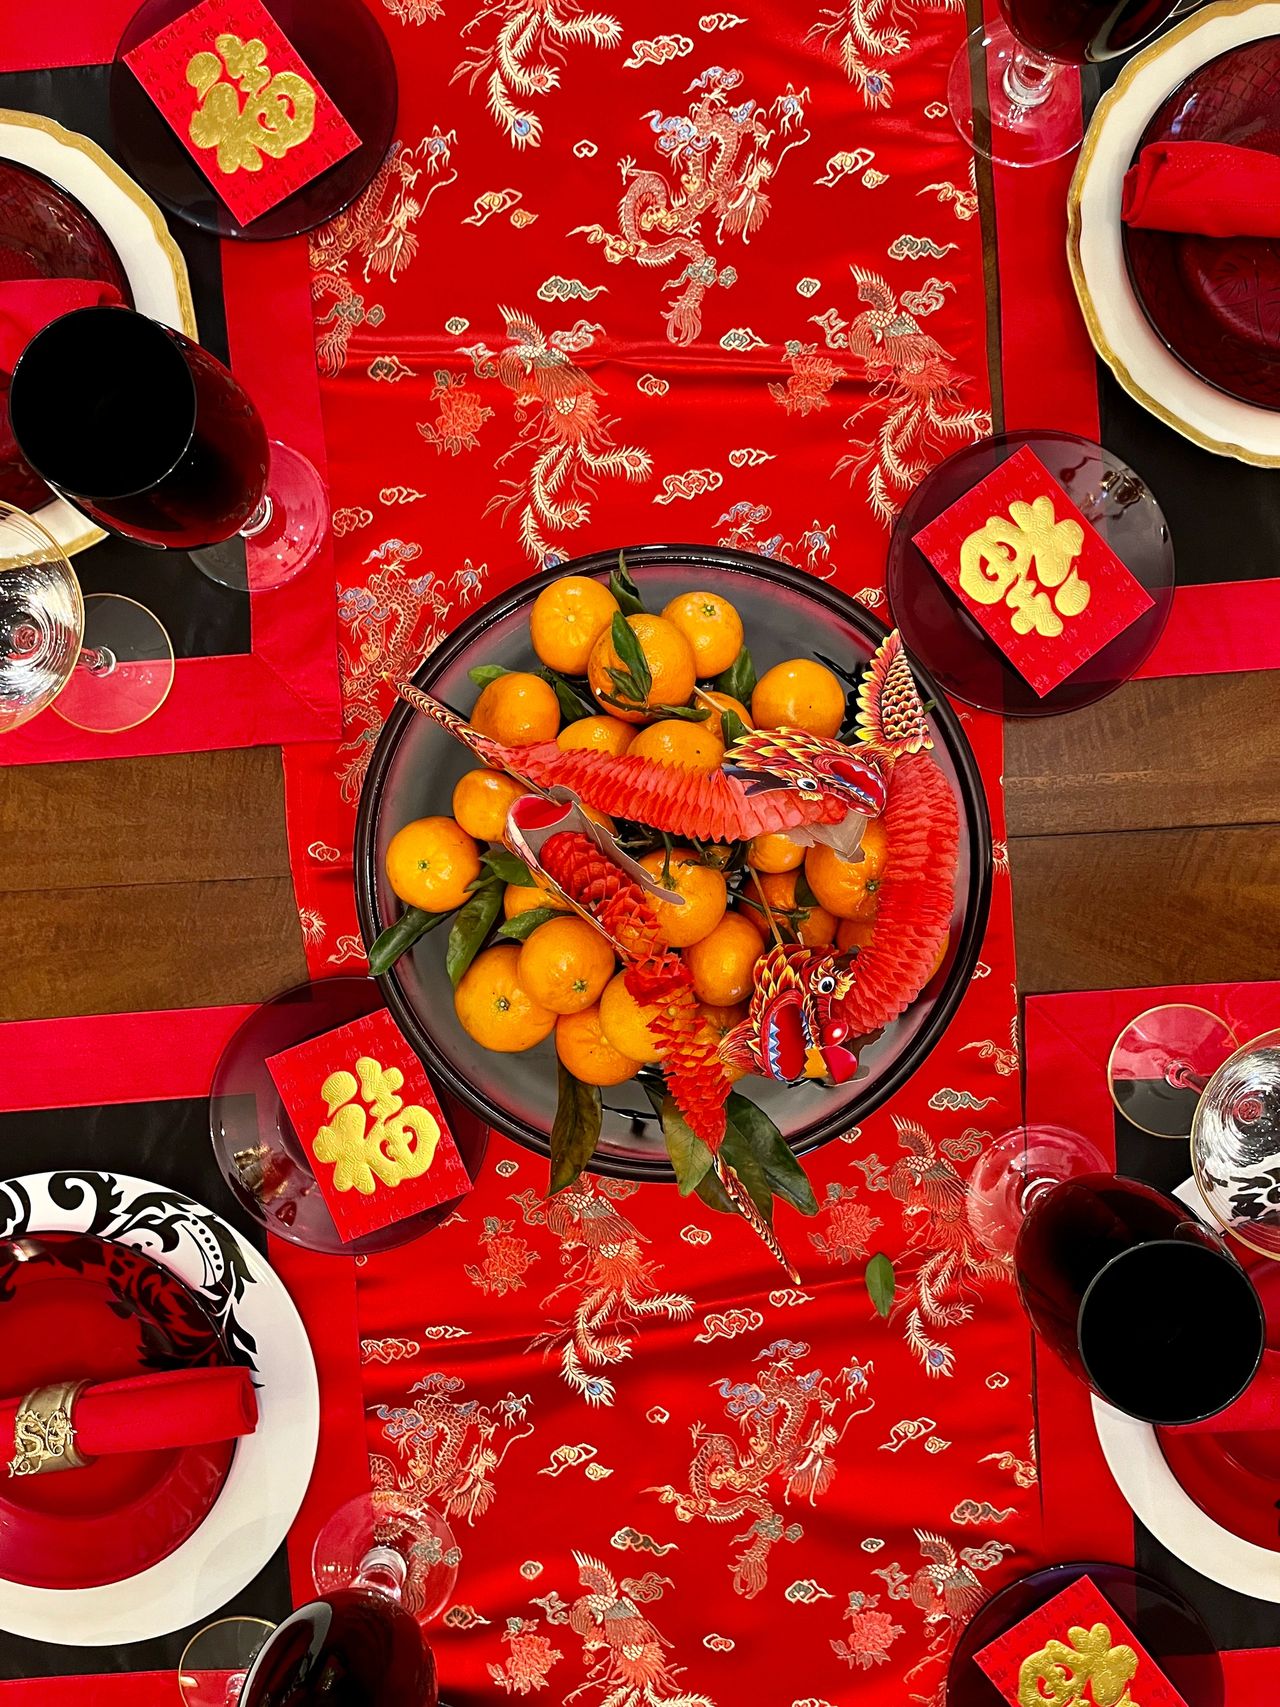 Tangerines and dragons on a red table runner.